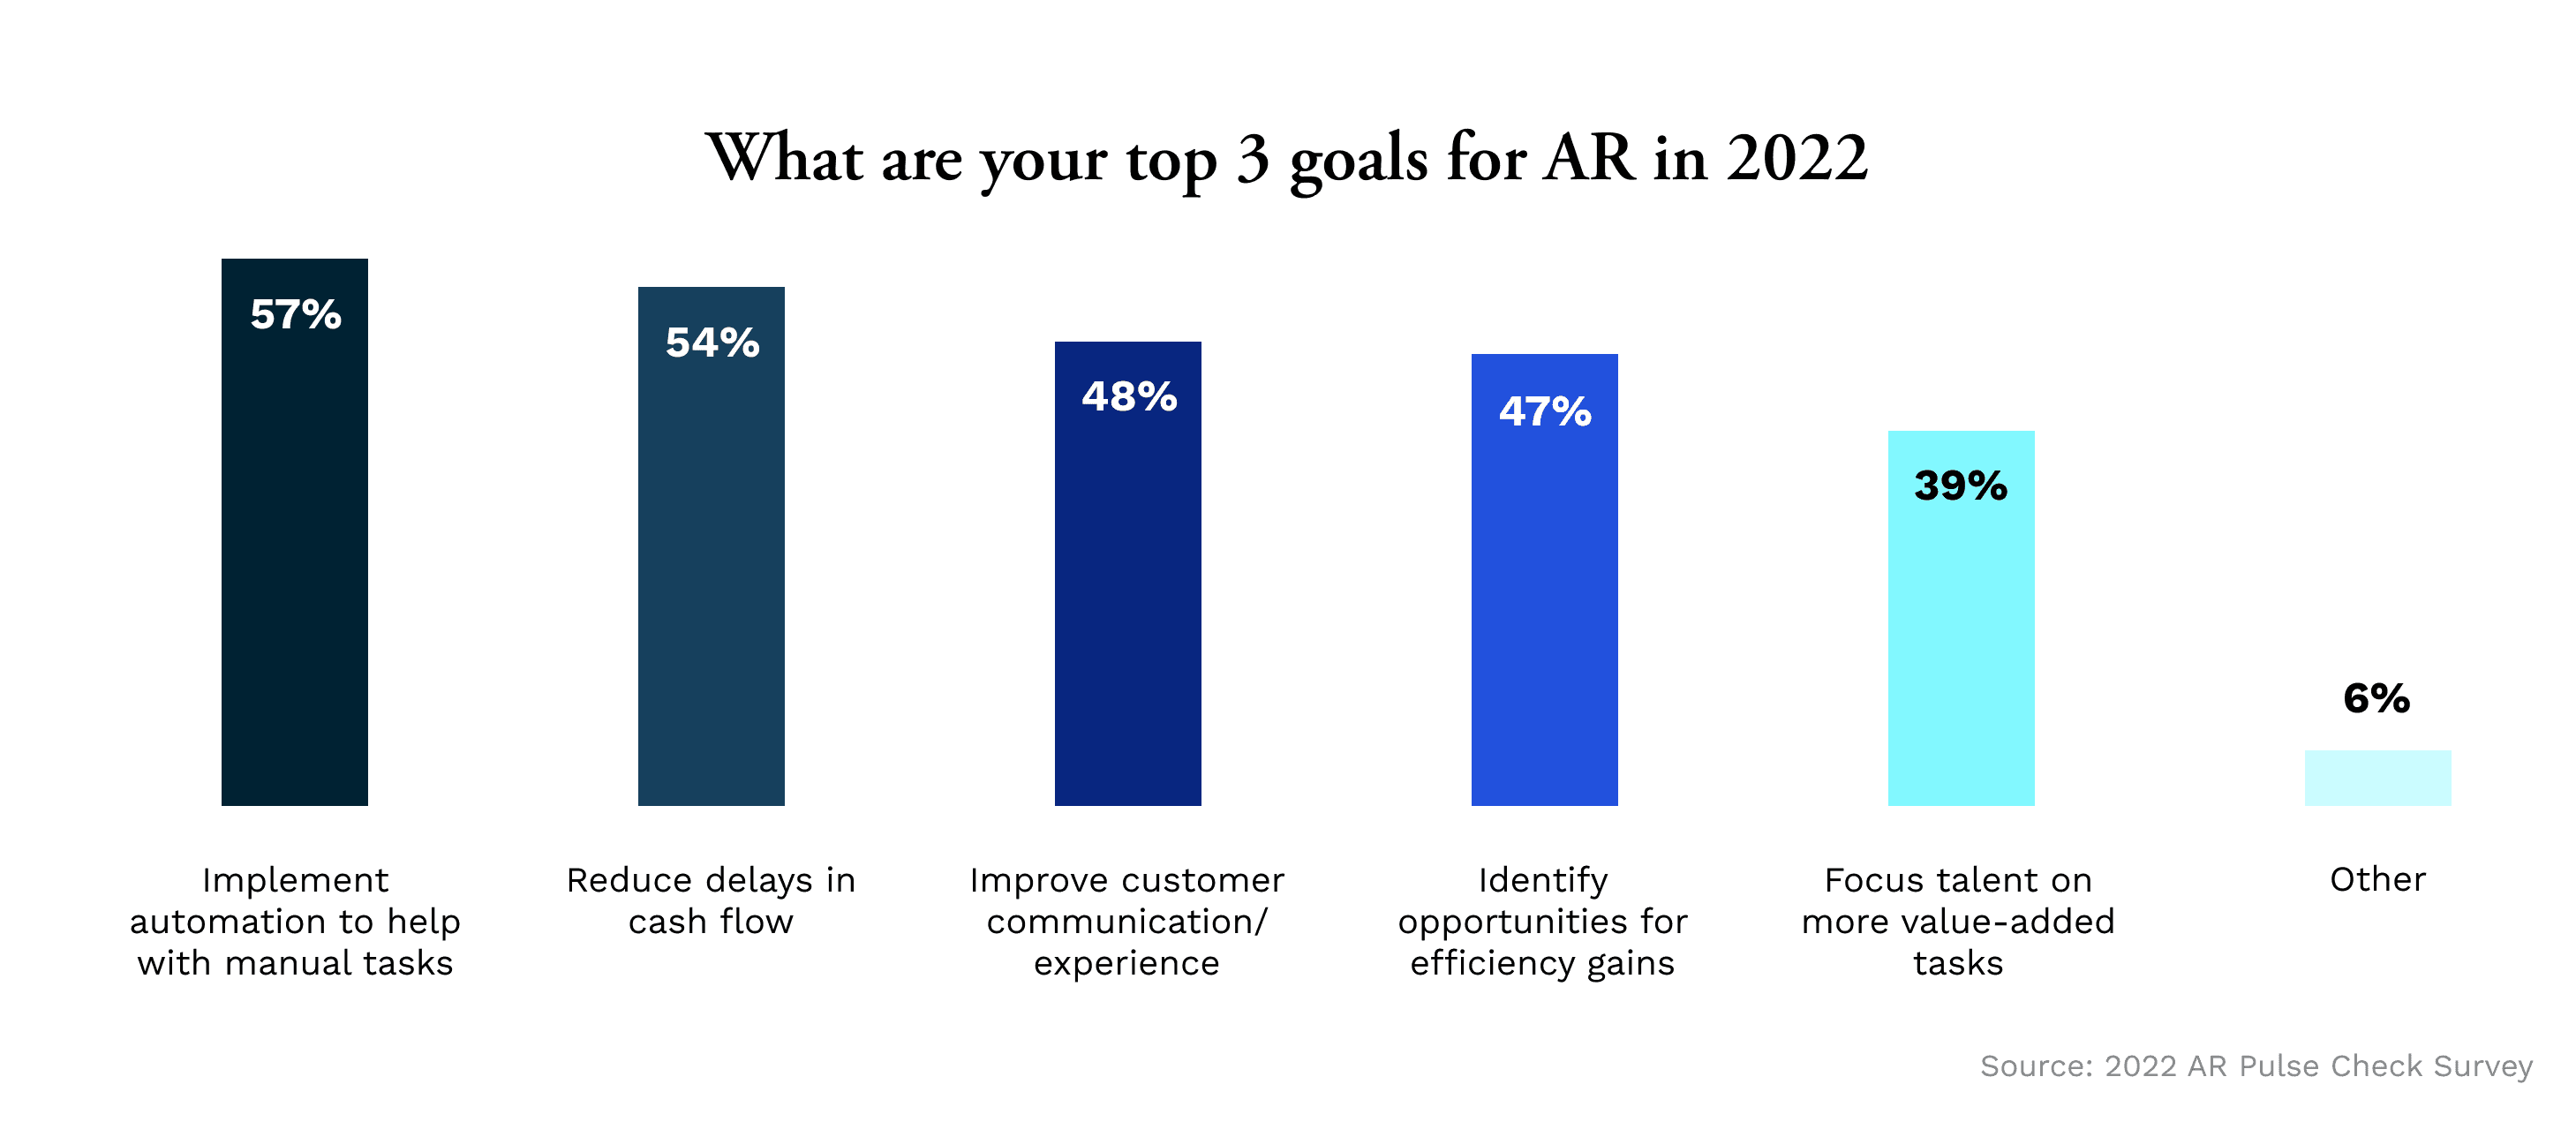 Top 3 goals for AR in 2022